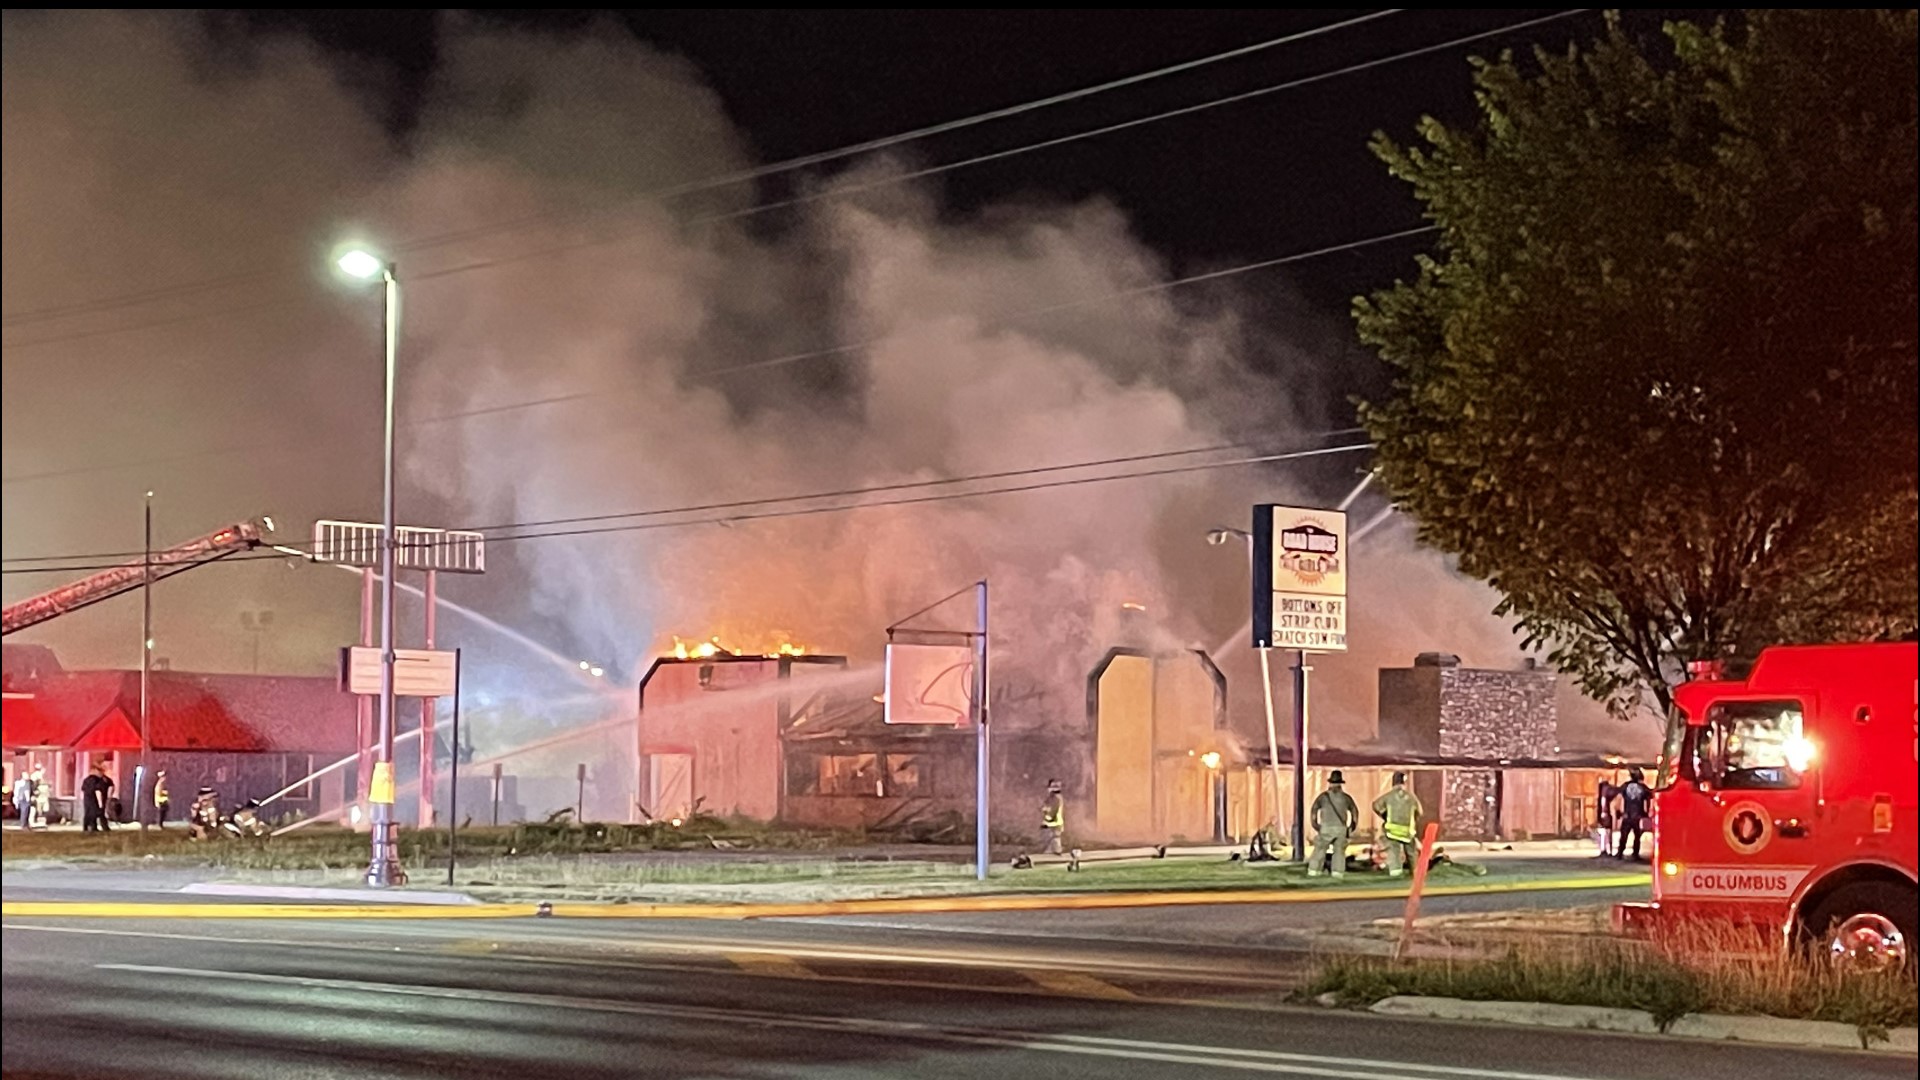 Firefighters said the fire began around 3 a.m. in the 200 block of Georgesville Road.